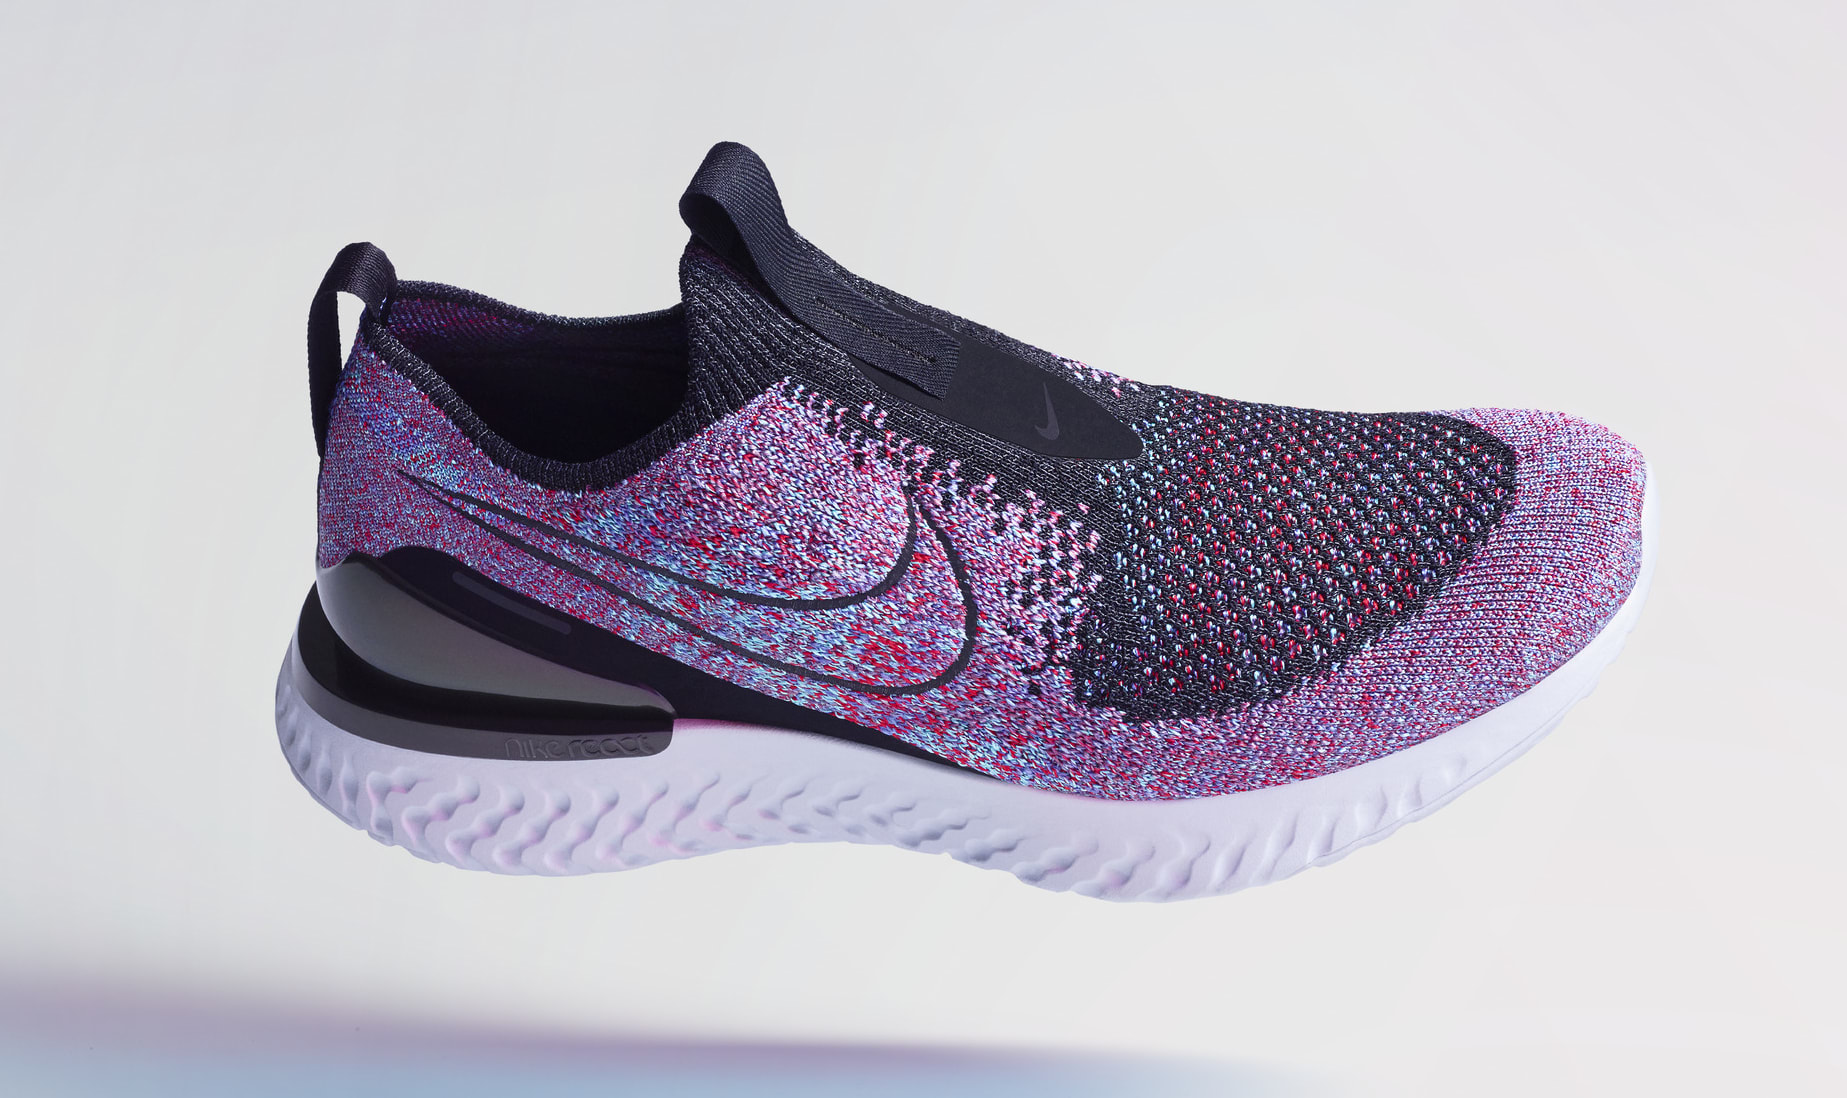 Nike Phantom React Flyknit Unveiled: Official Images and Release Info